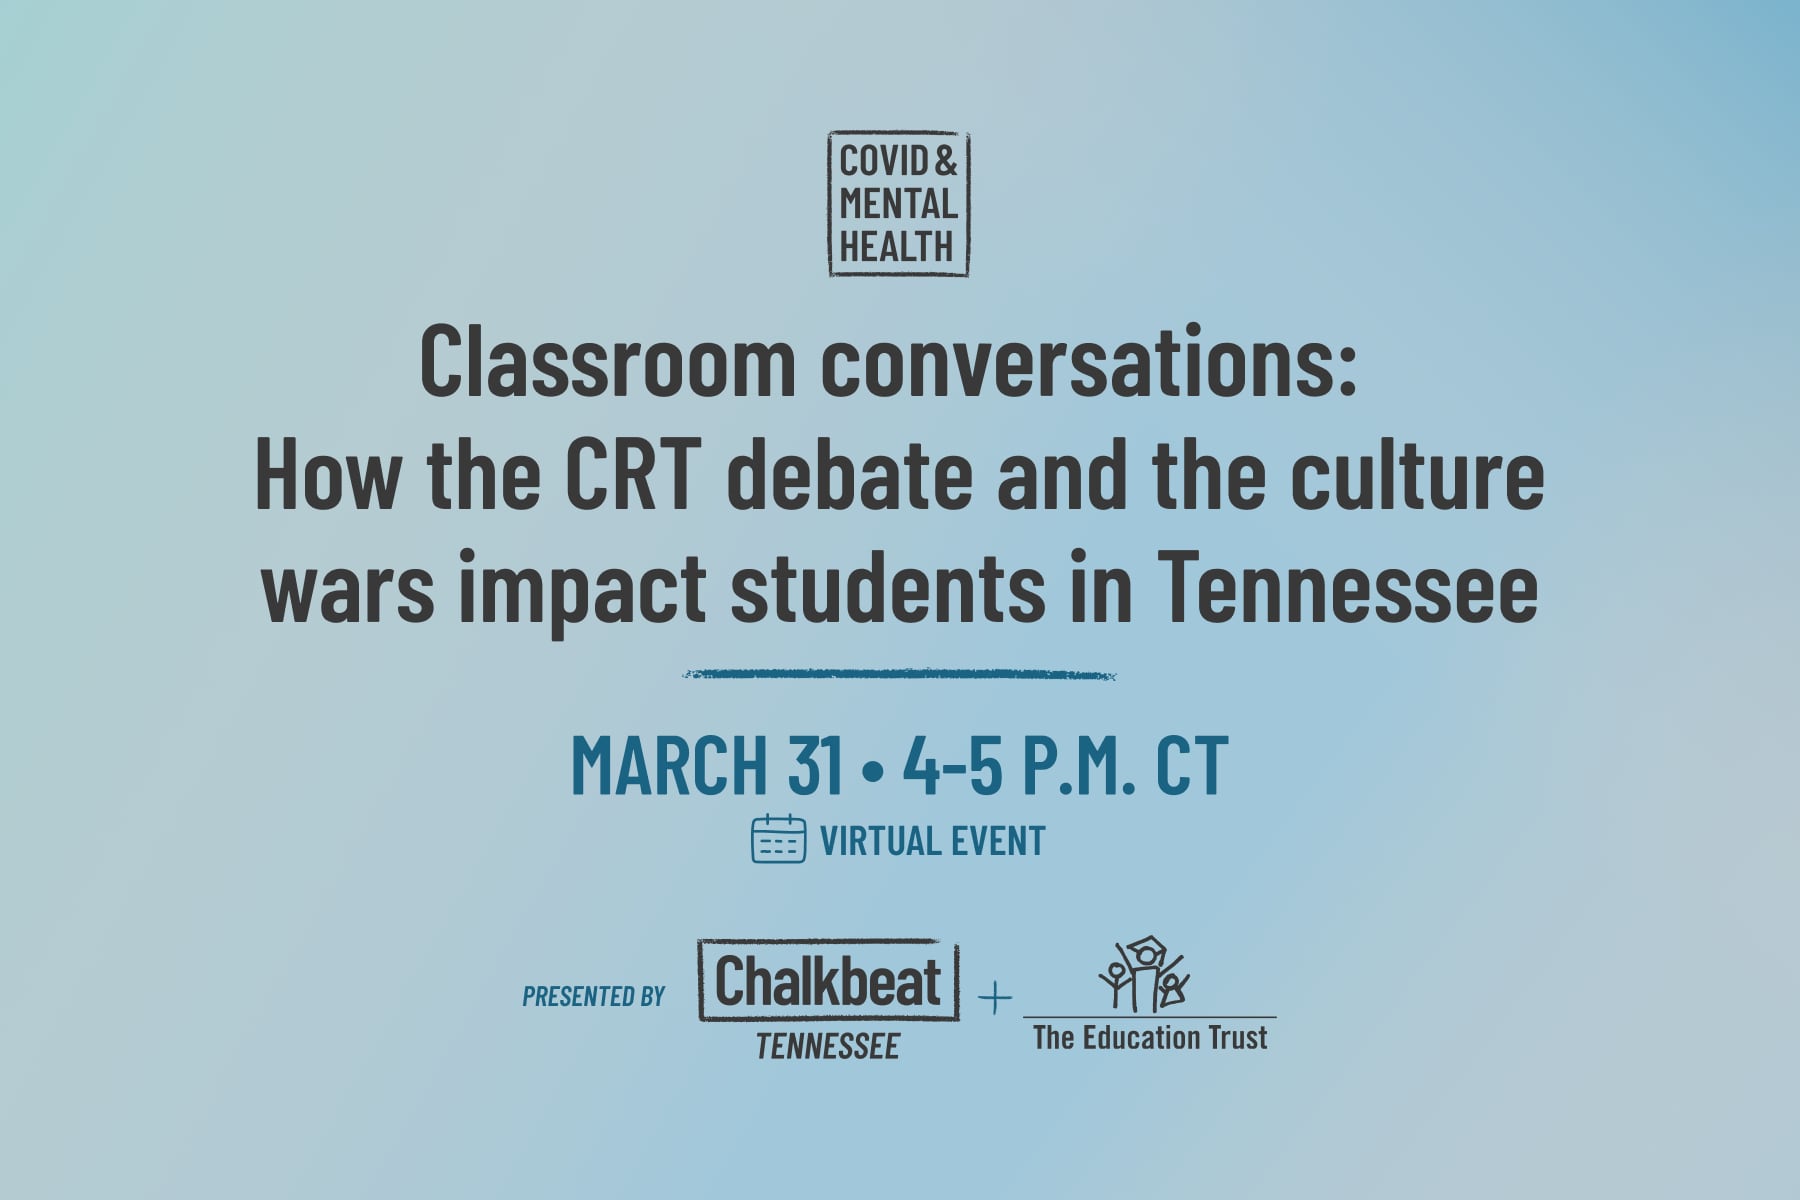 Promotional image for event with title: How the CRT debate and the culture wars impact students in Tennessee